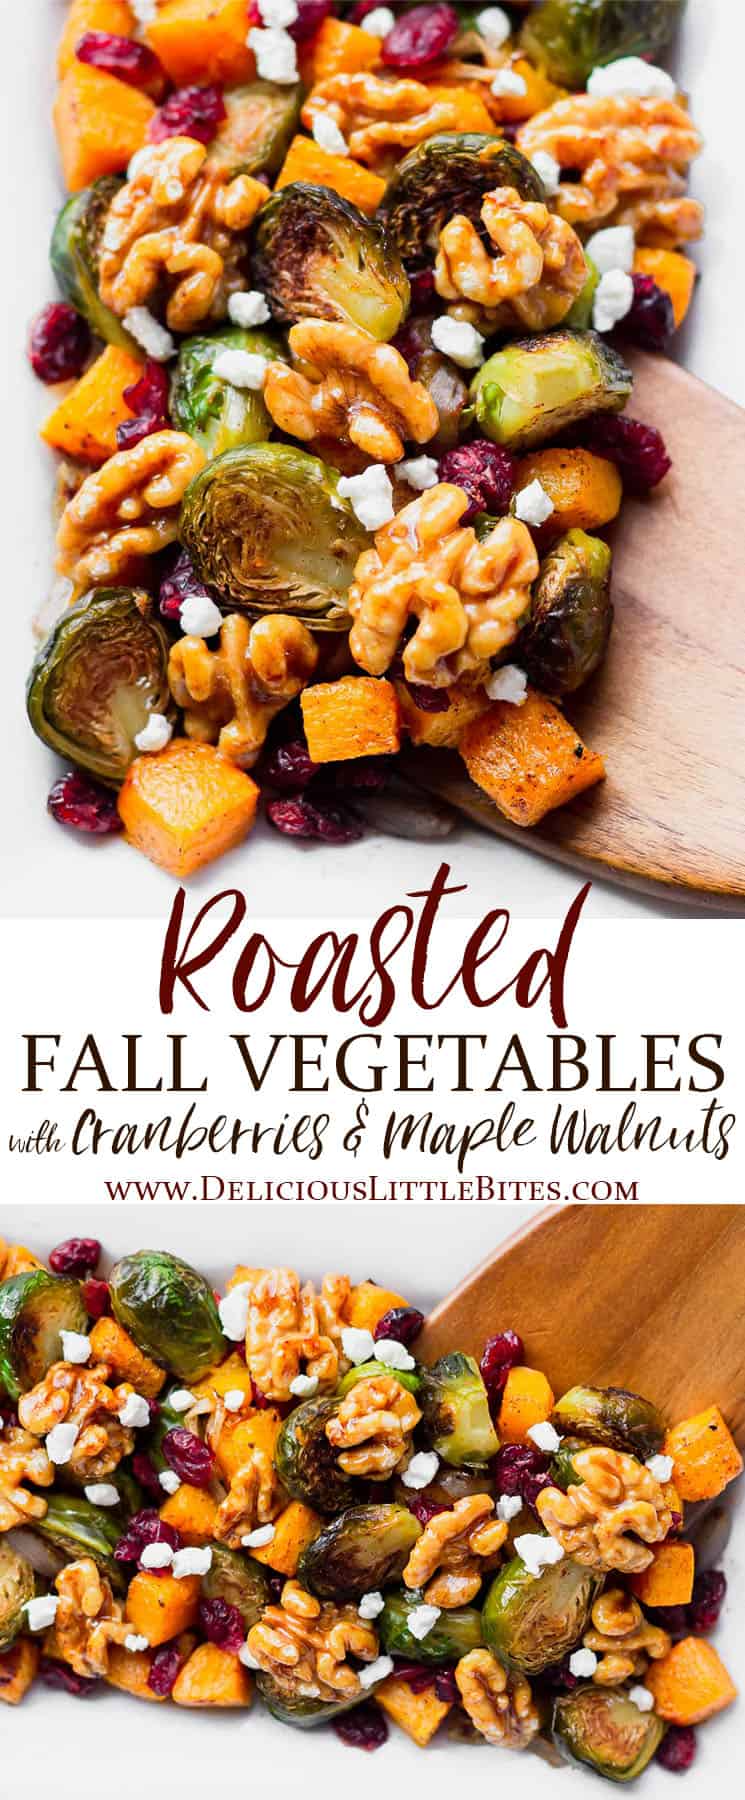 Roasted Fall Vegetables (with Cranberries & Maple Walnuts) - Delicious Little Bites -   19 thanksgiving recipes side dishes healthy ideas